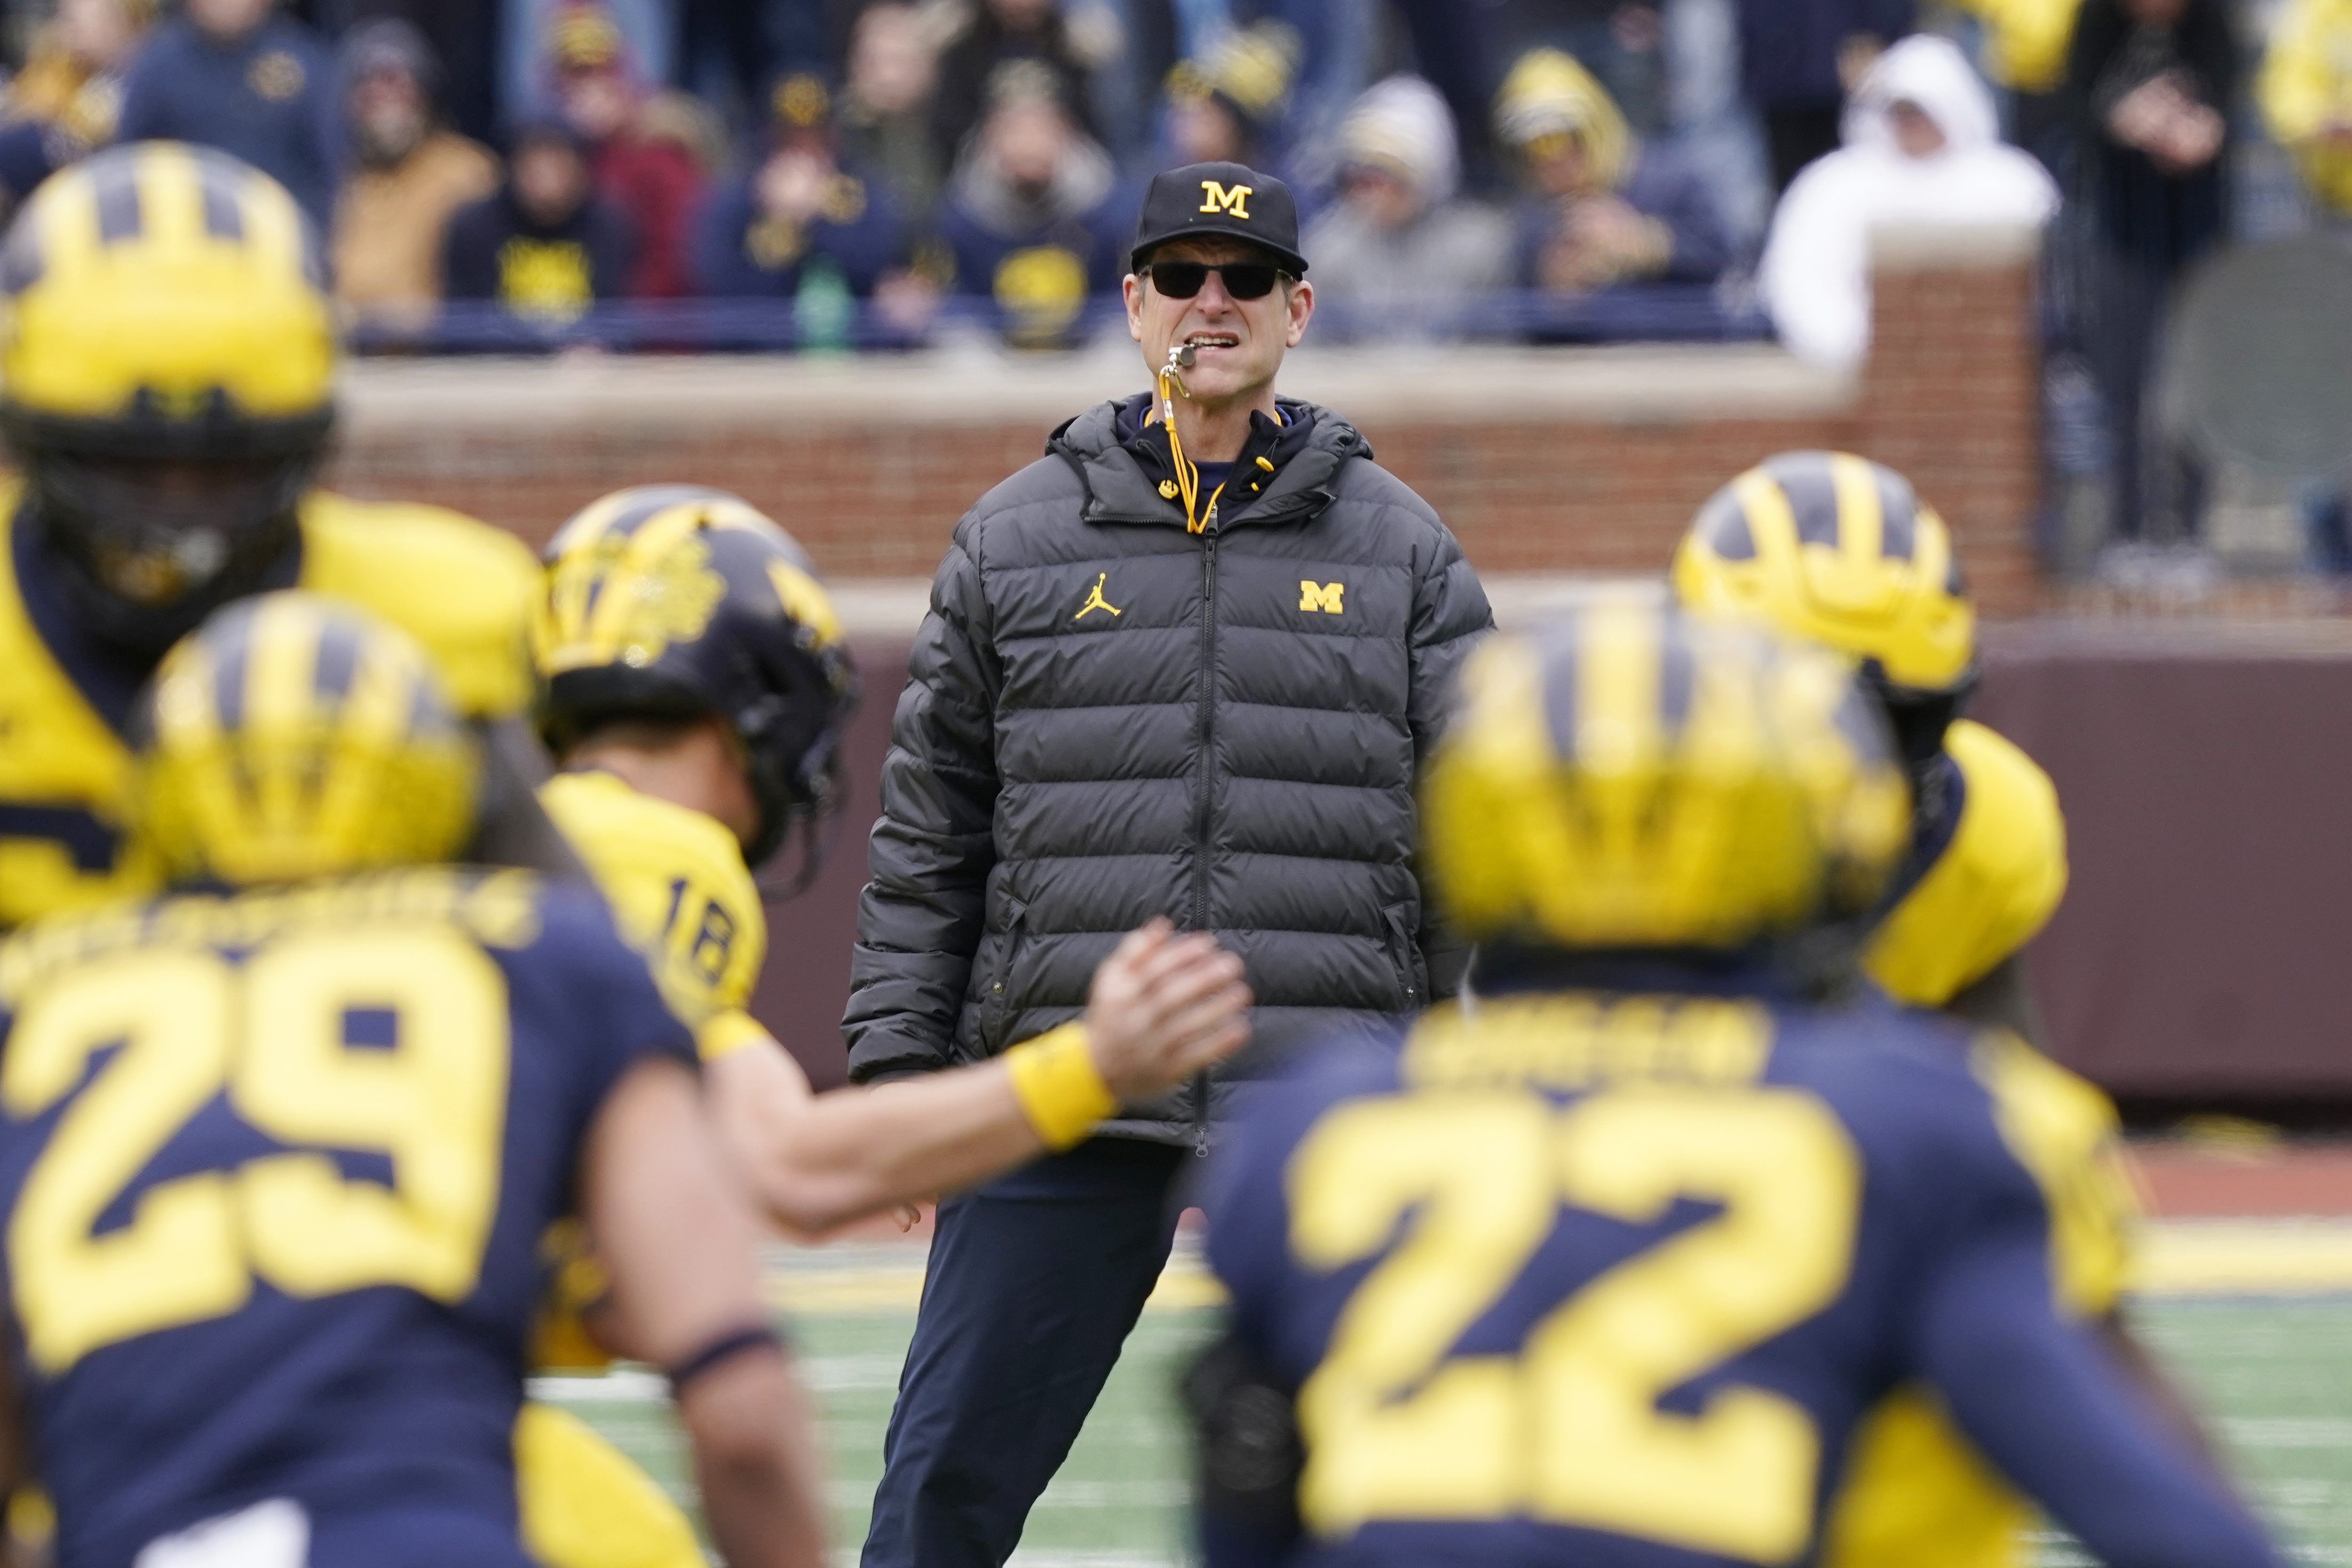 AUDIO: Does the U of M care about Football Expectations?